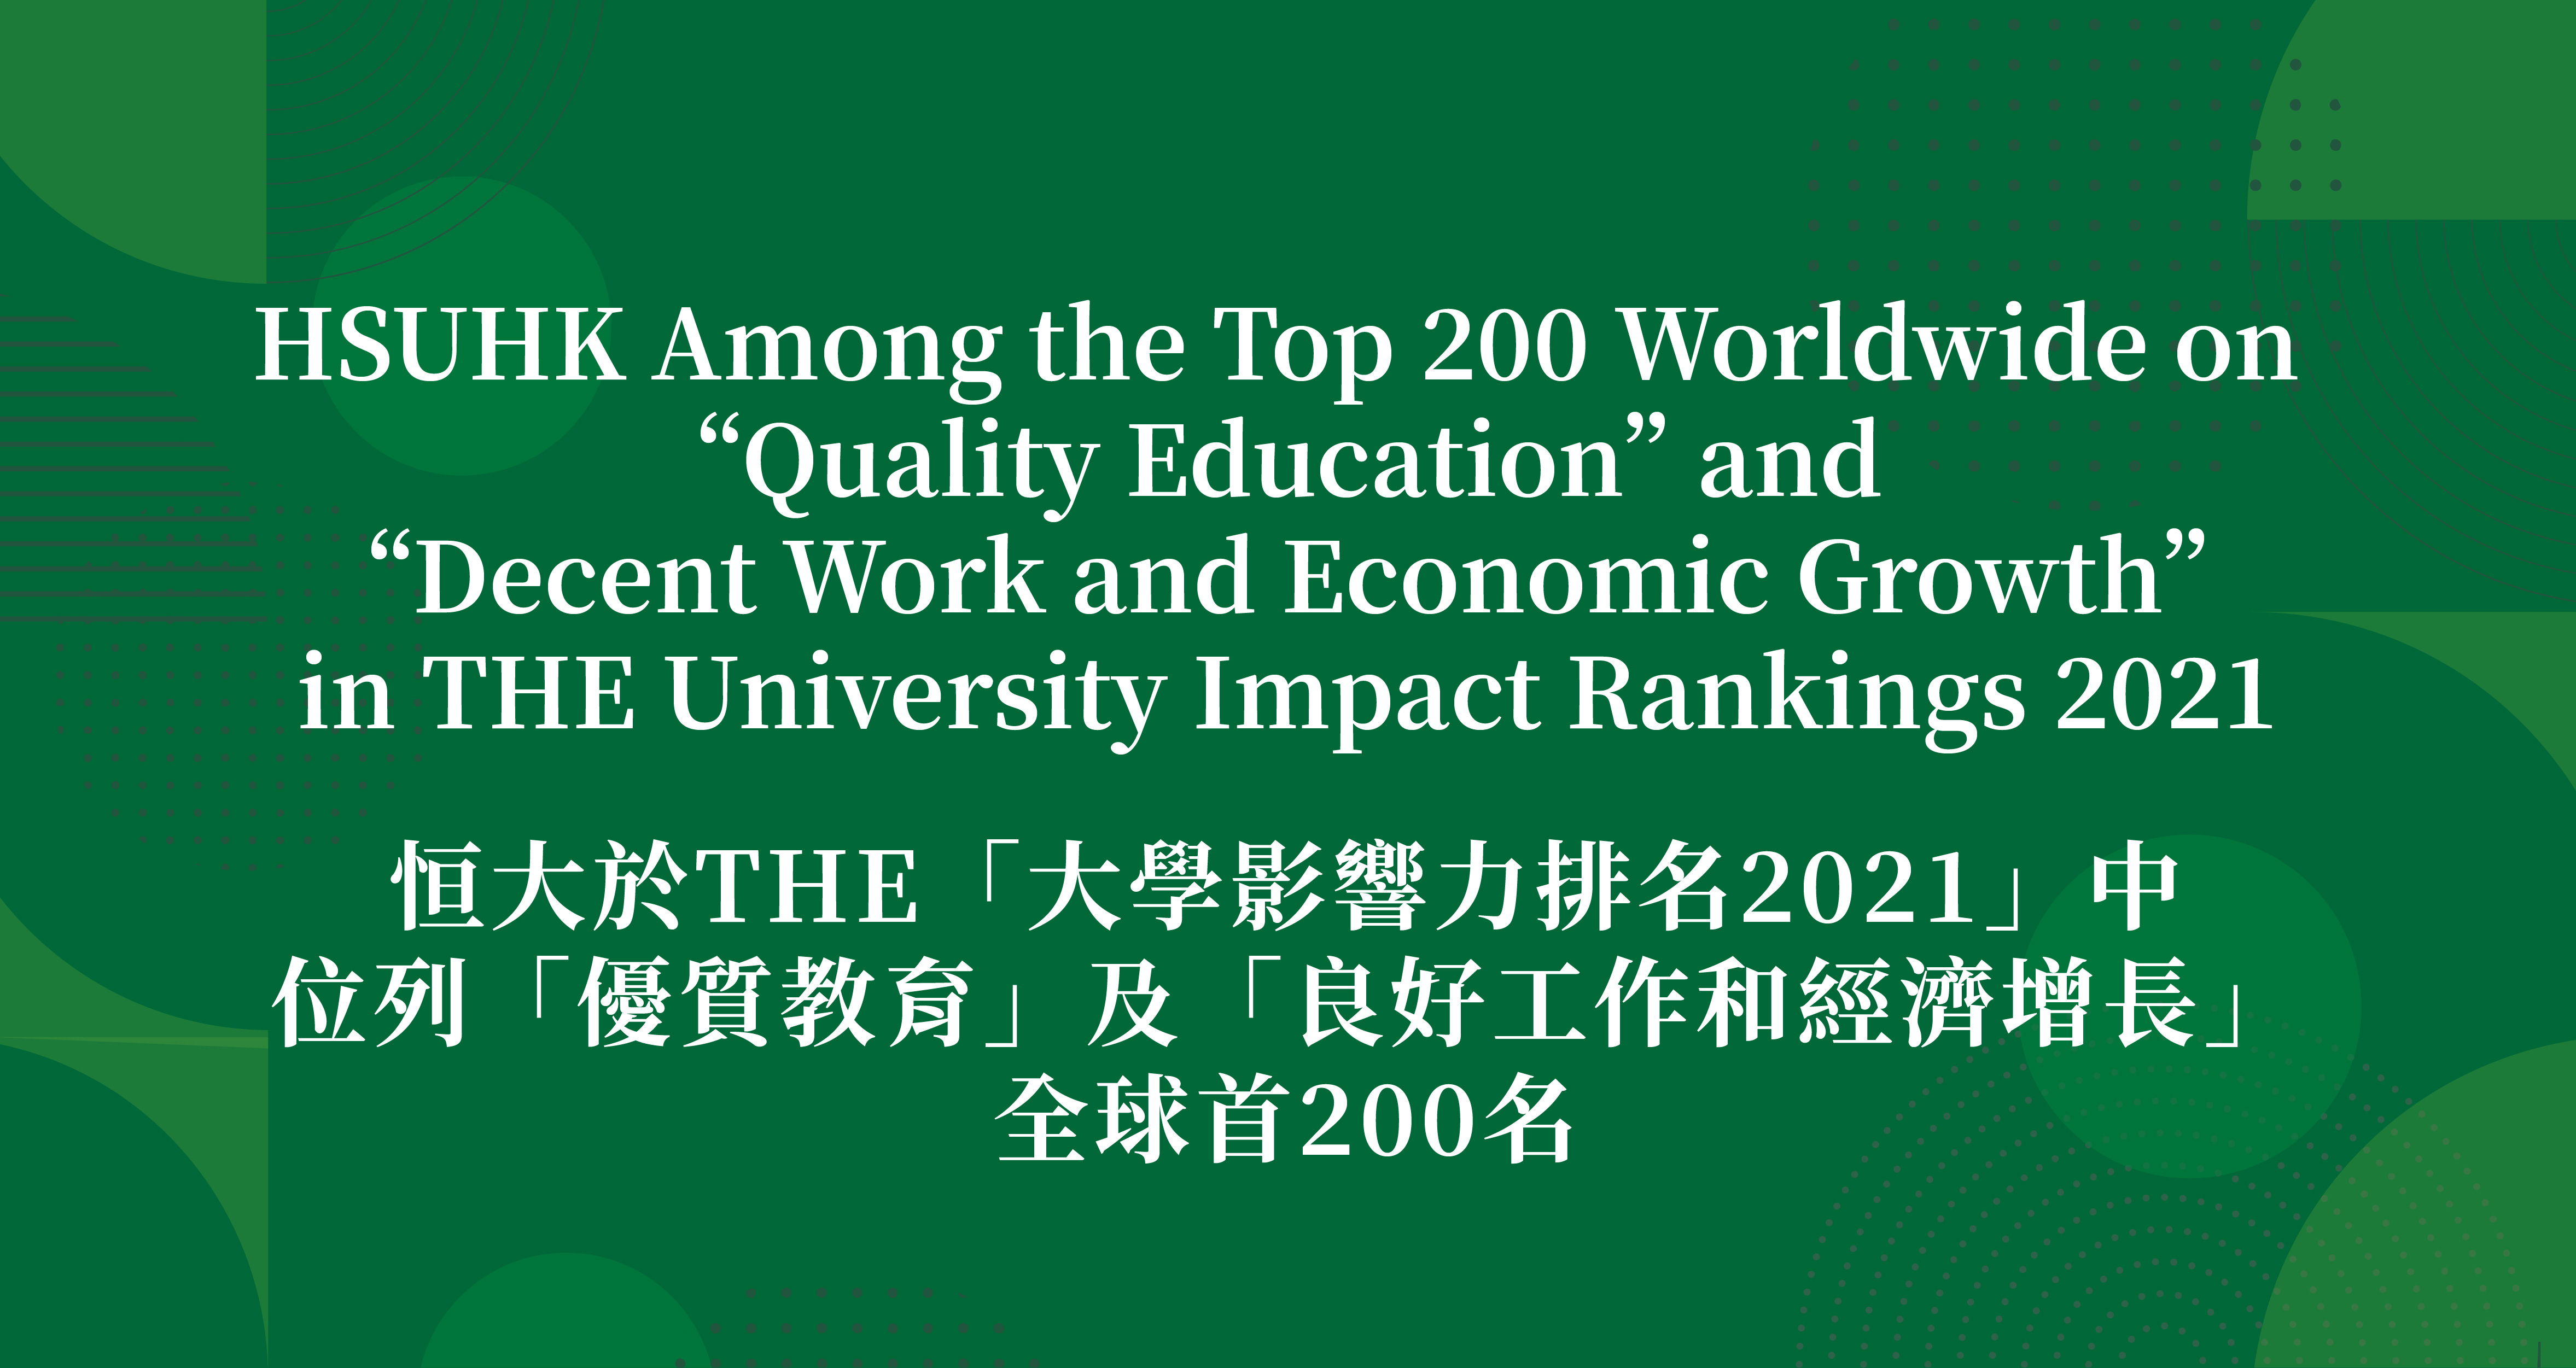 HSUHK Among the Top 200 Worldwide on “Quality Education” and “Decent Work and Economic Growth” in THE University Impact Rankings 2021